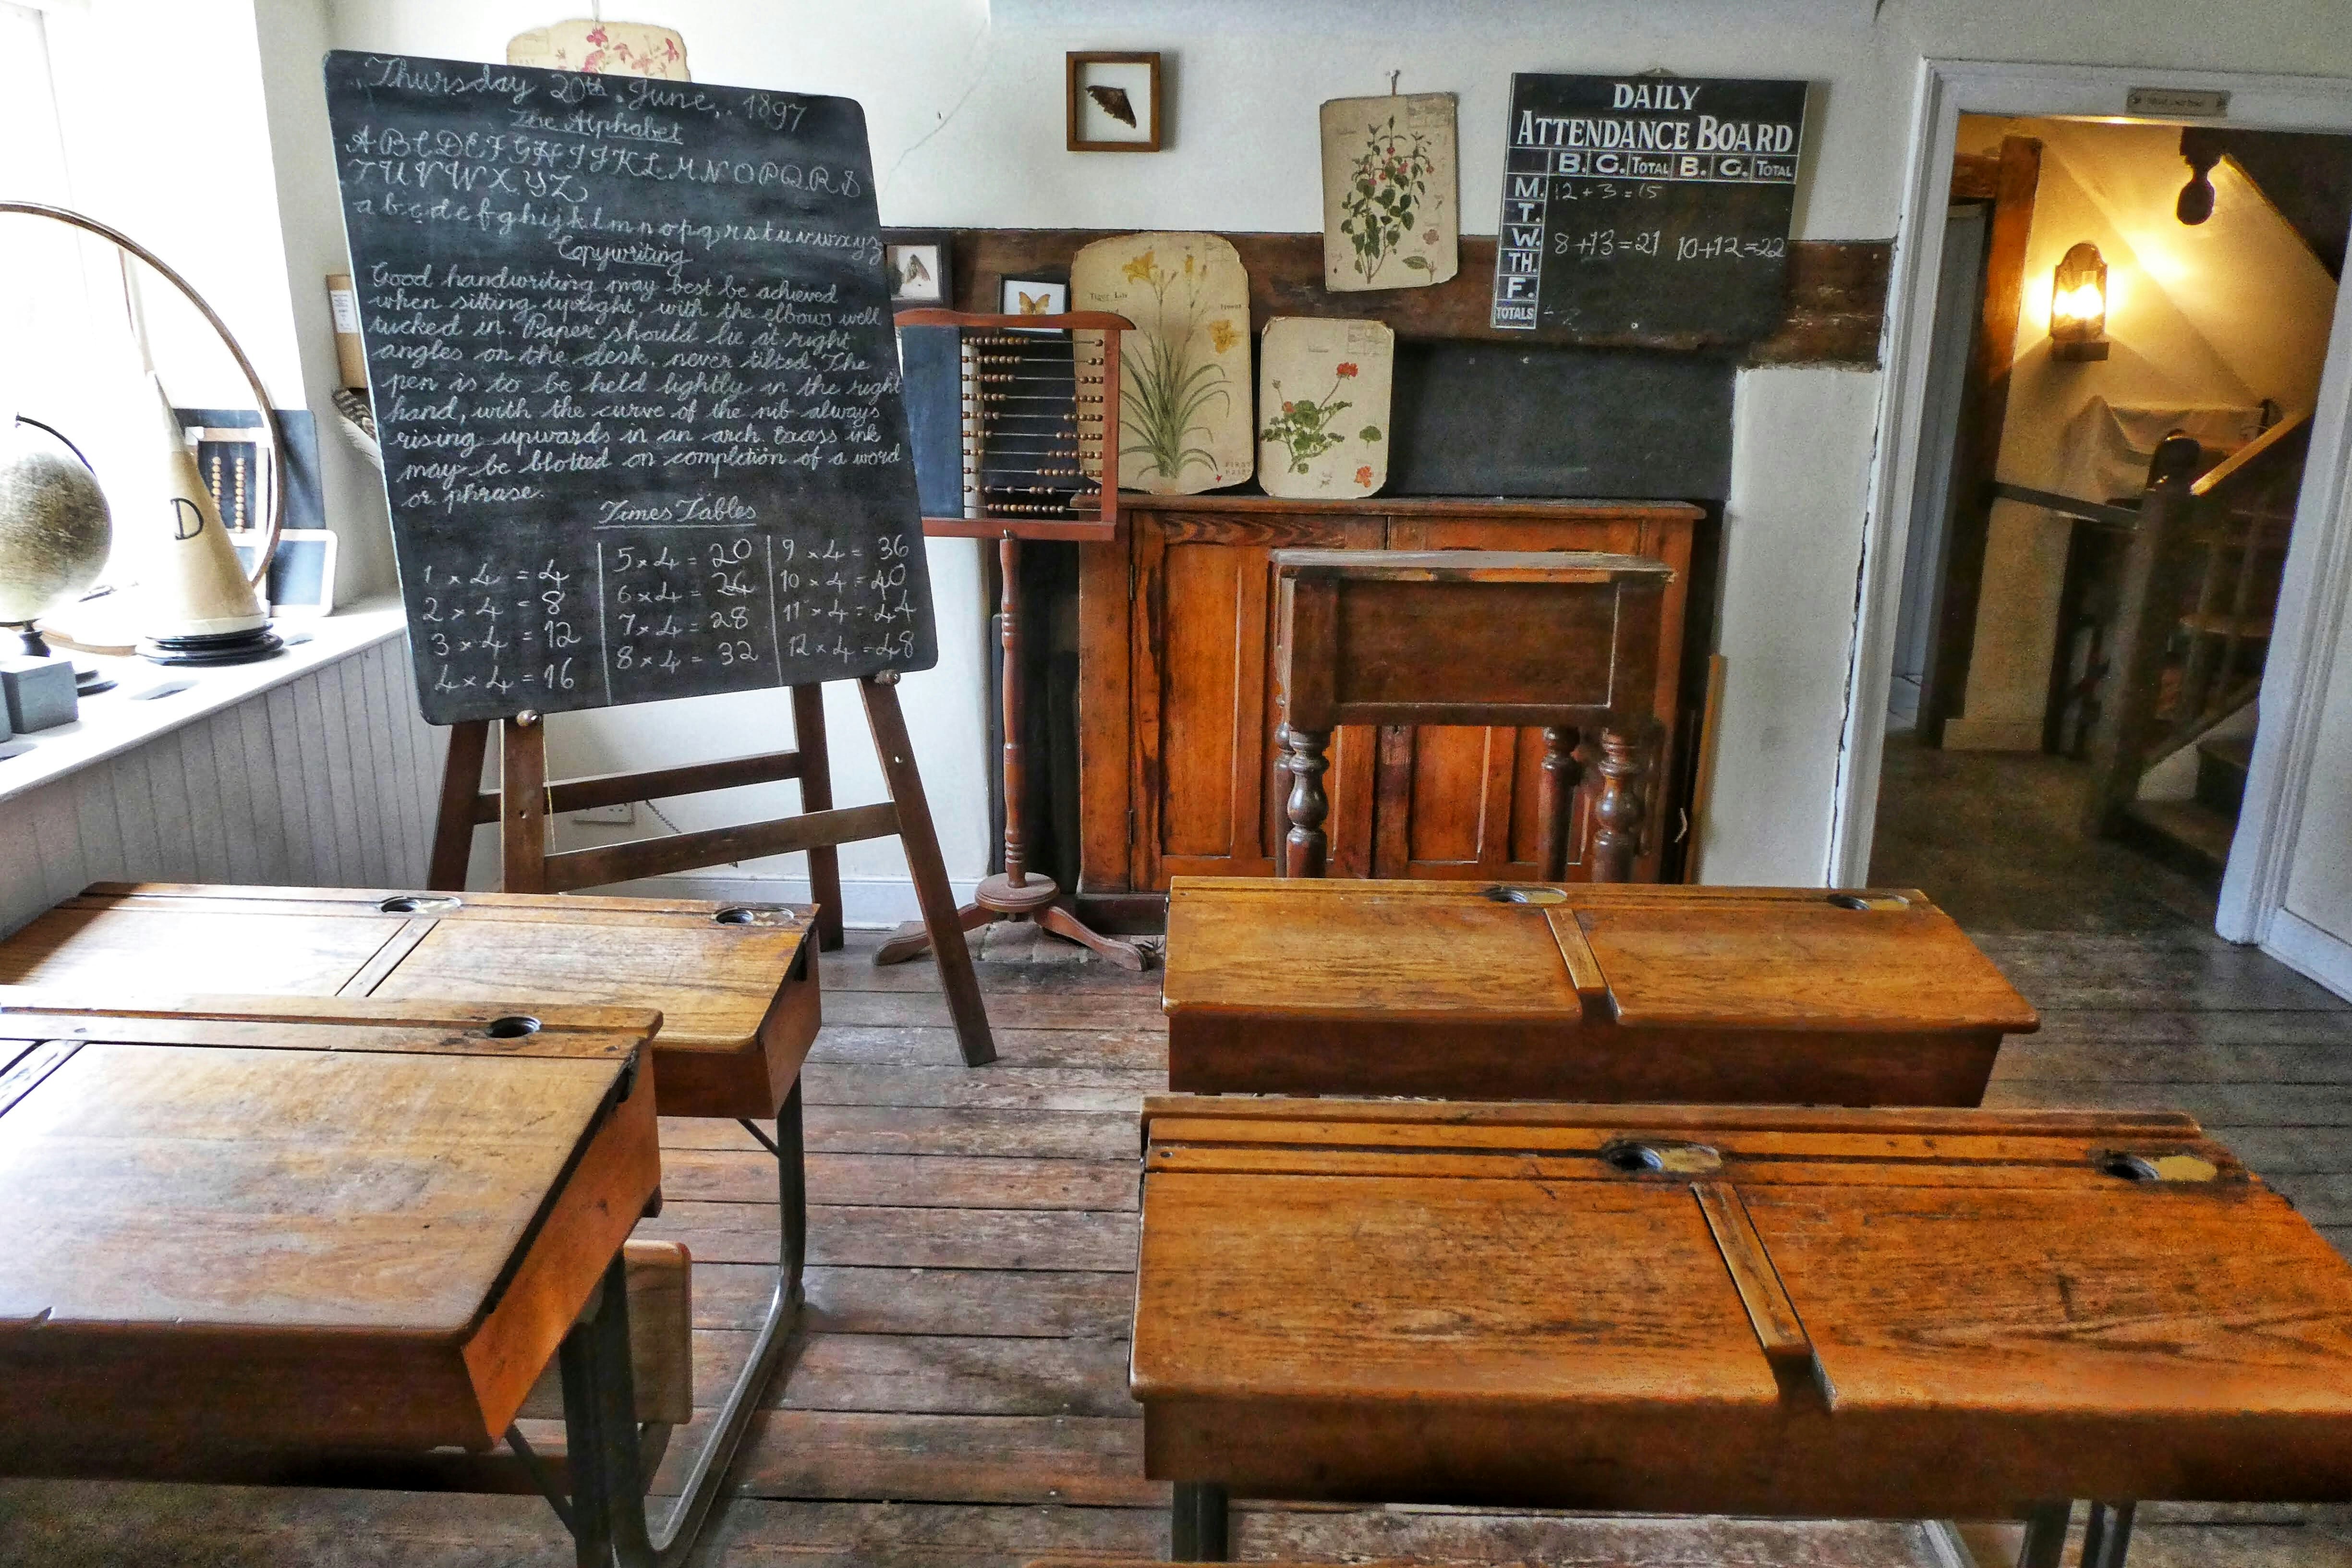 Times gone by a Back to School scene from the 20th Century. Blackboard and chalk.  The days before technology, when life was more simple, although school life much stricter. No calculators, we had to learn our times tables. This photo makes me feel fascinated.  